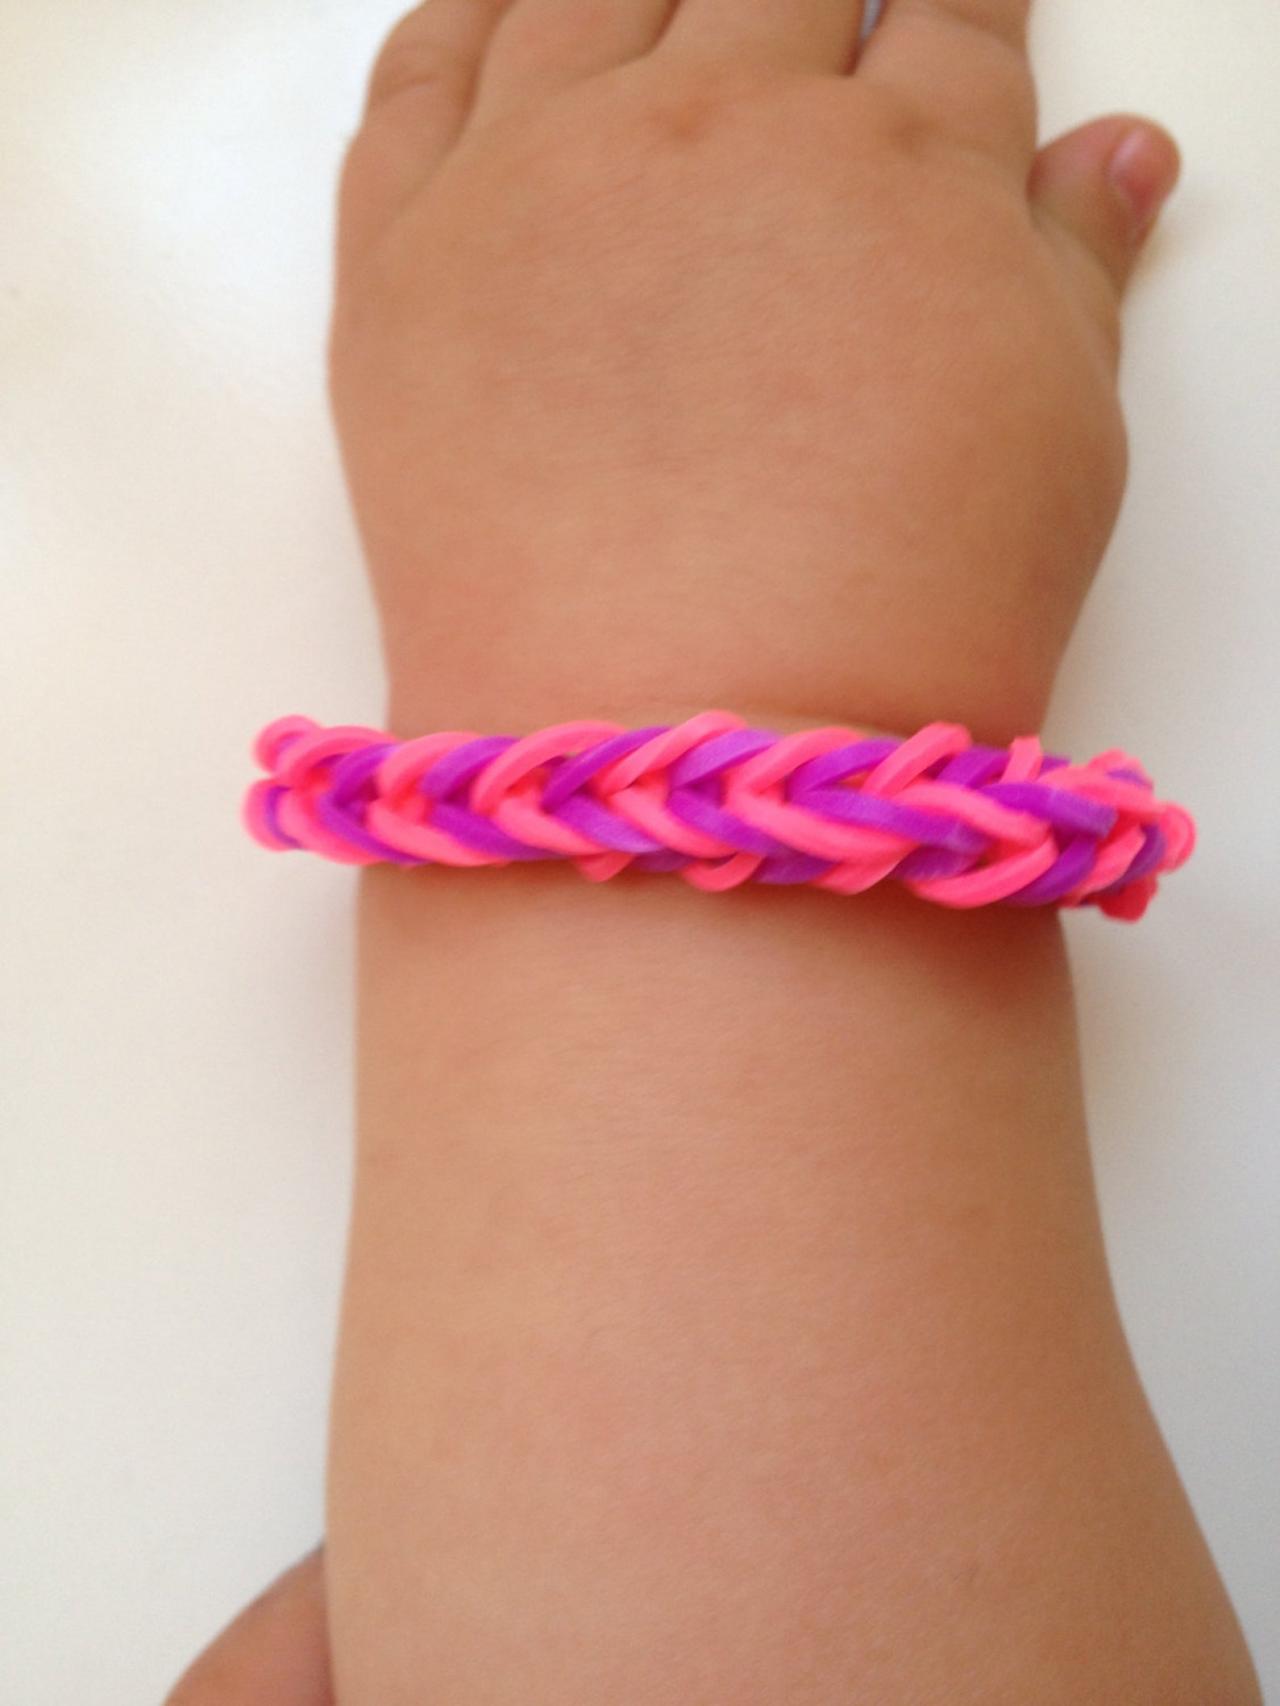 Little girl bracelet 70 - little girl fashion rubber bands jewelry for Kids pink and purple